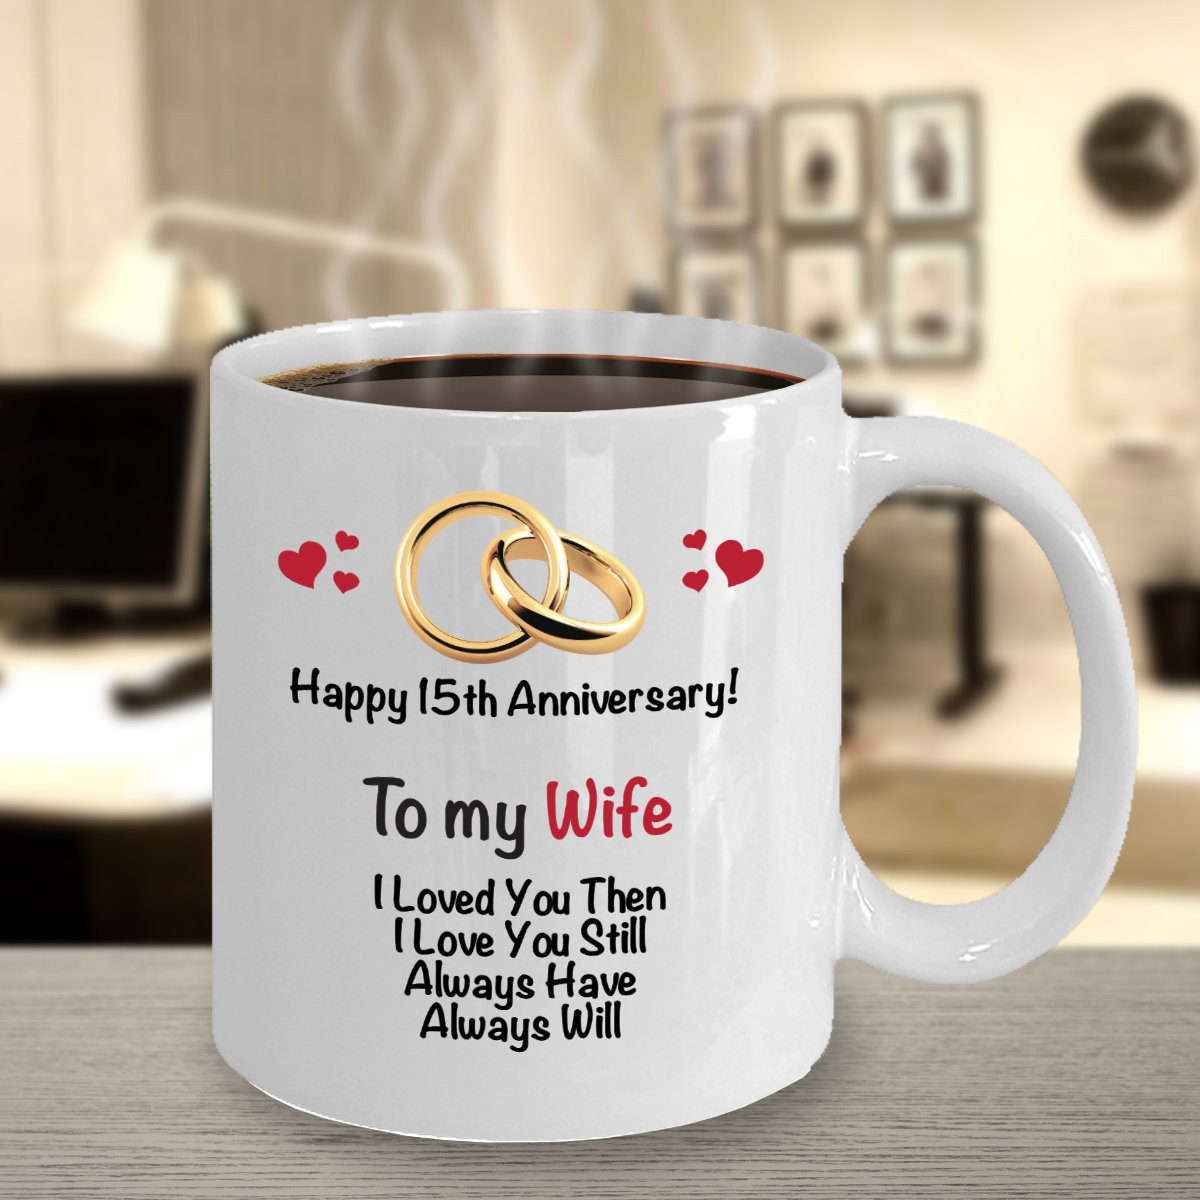 Gift Ideas For 15Th Wedding Anniversary
 15th Anniversary Gift Ideas for Wife 15th Wedding